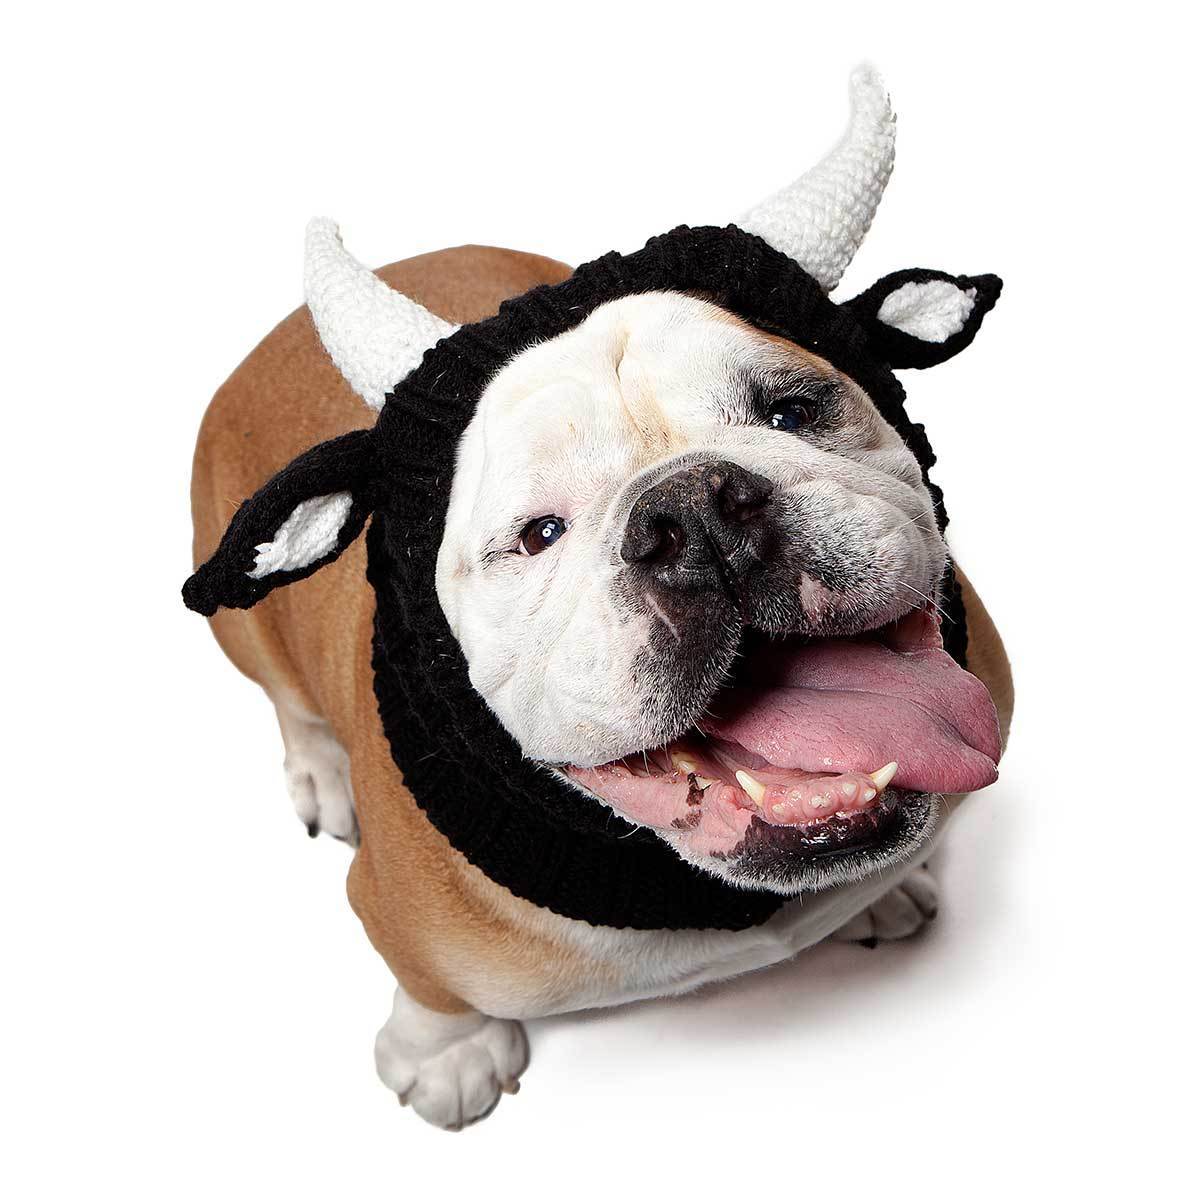 Halloween Costumes for Dogs? - The Other End of the Leash